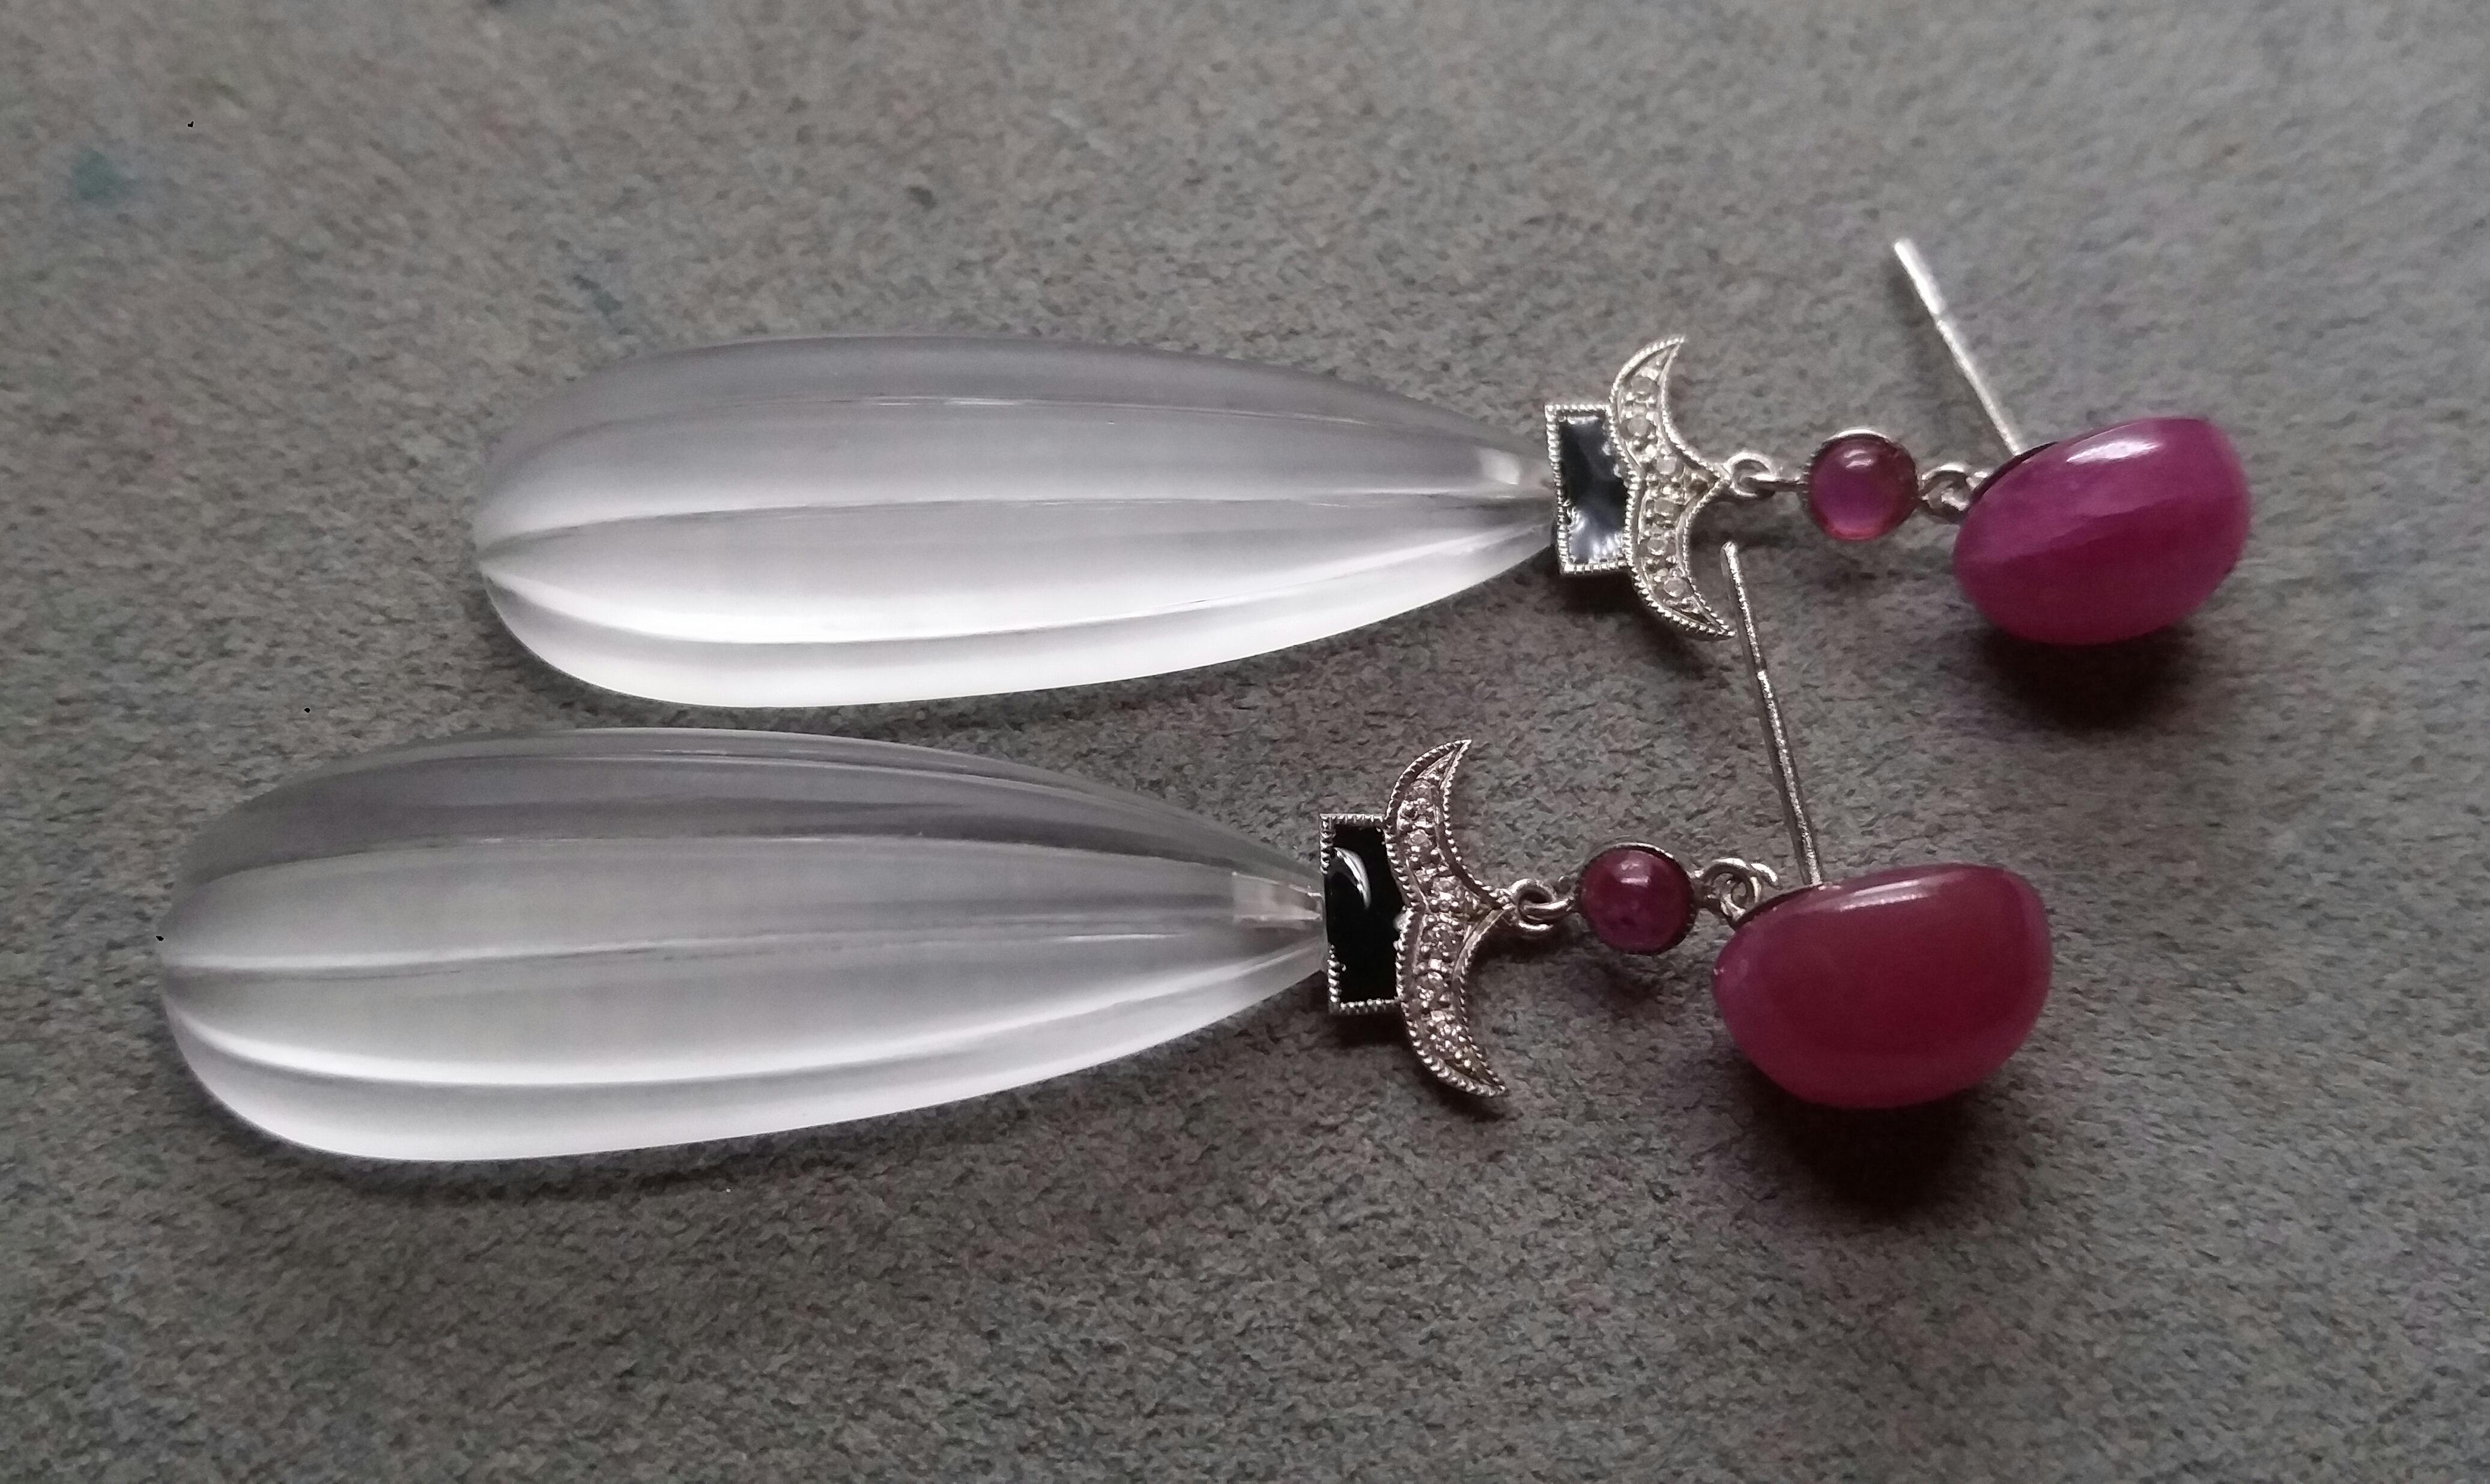 The tops are 2 Ruby Oval cabs ,middle  parts are composed of 2 small round Ruby cabochons and 2 white gold elements with 12 round full cut diamonds and Black Enamel ,in the bottom parts we have 2 Natural Rock Crystal Engraved Drops 35 mm long and 13